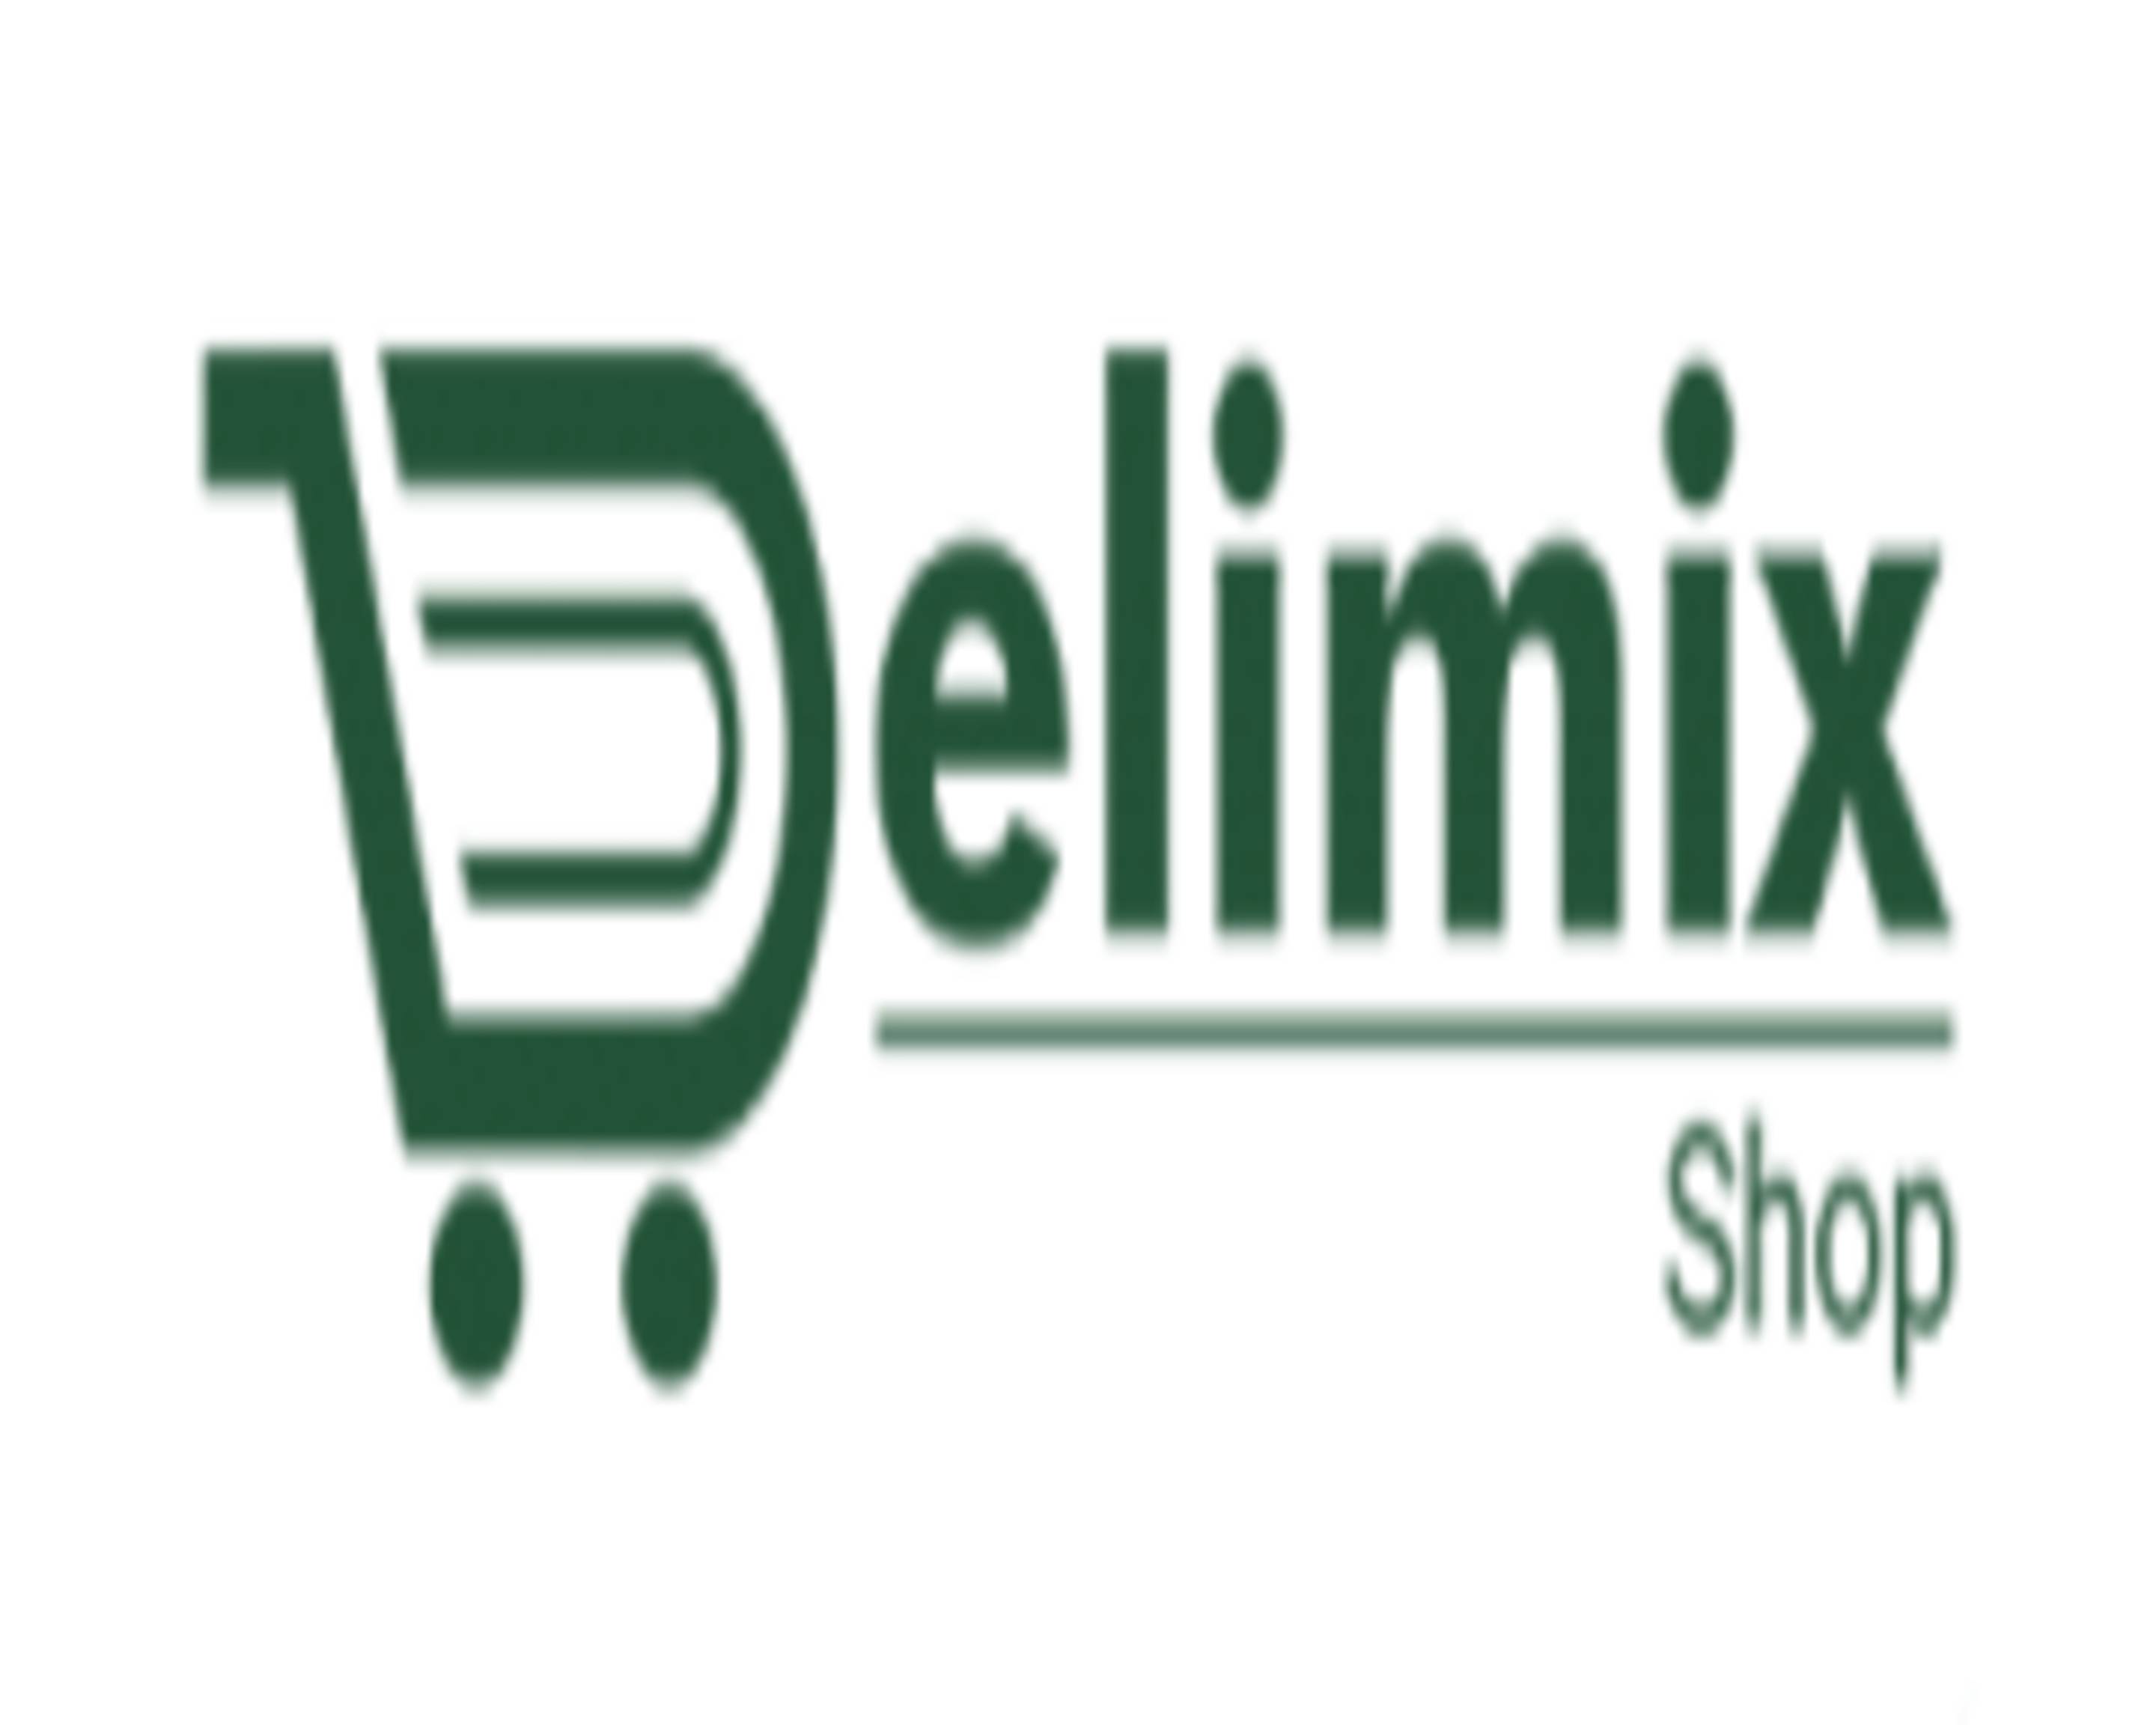 Order Delimix Shop Delivery【Menu & Prices】, 3993 Hastings Street , Burnaby